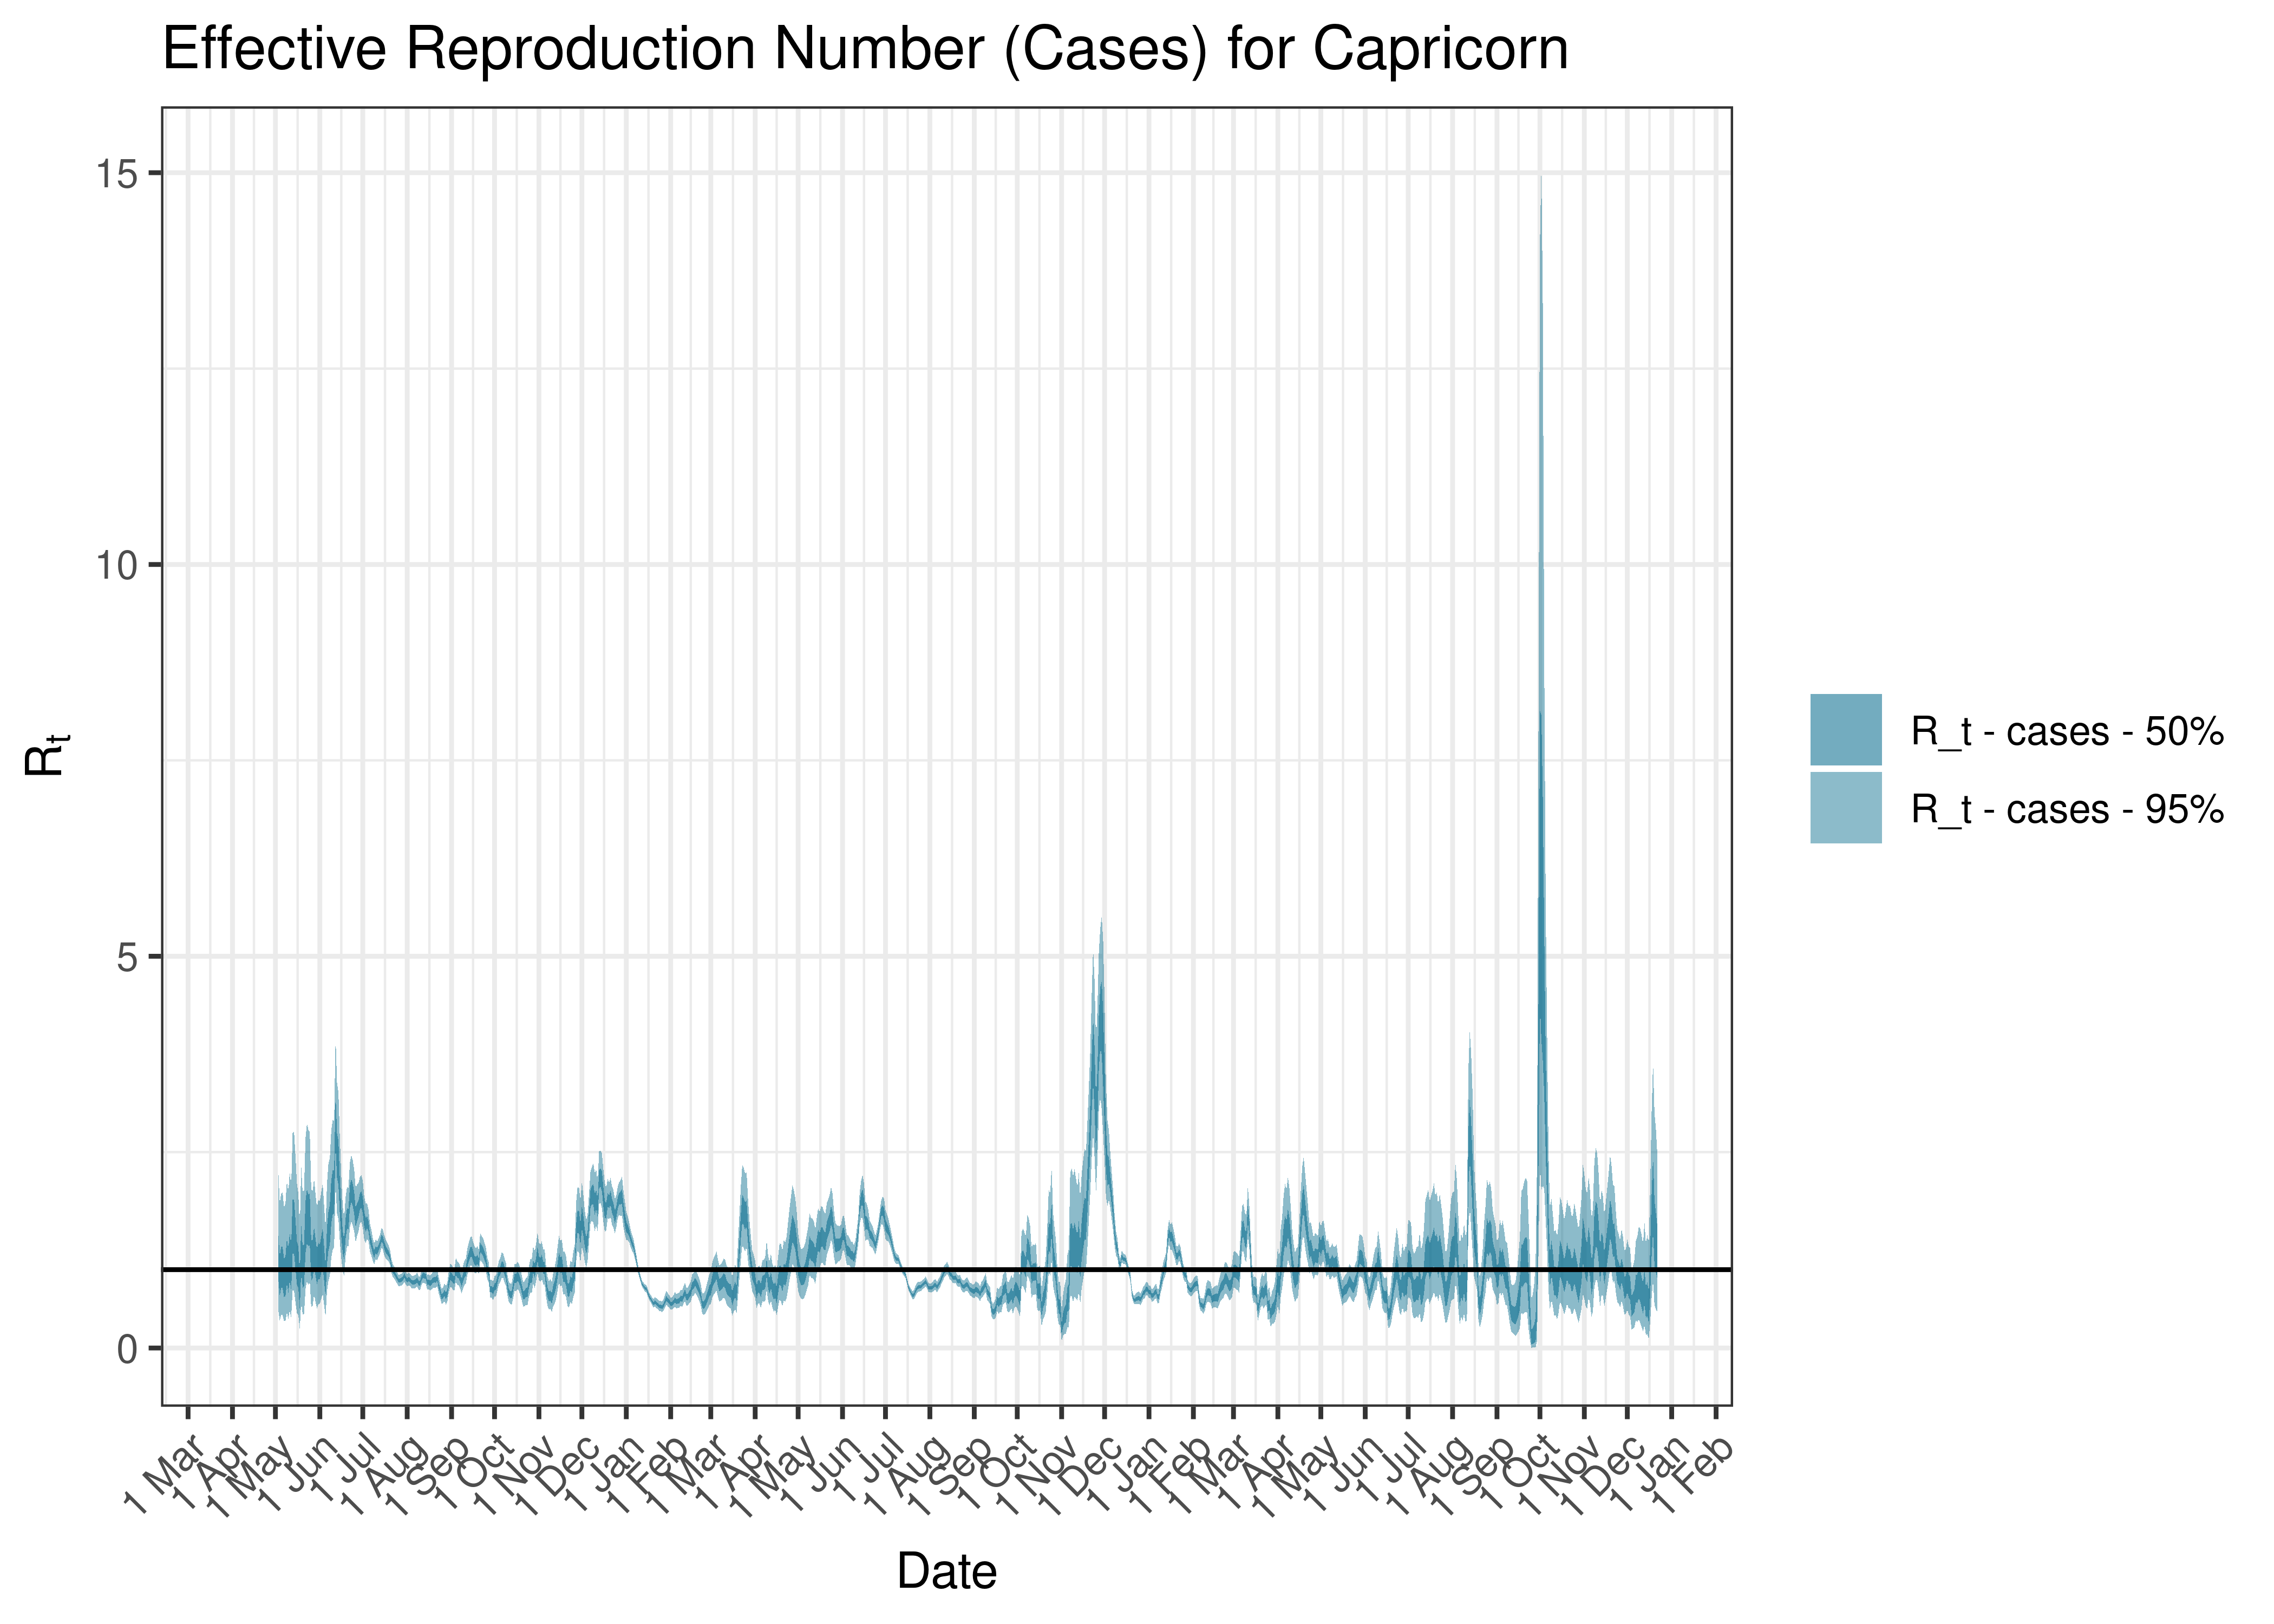 Estimated Effective Reproduction Number Based on Cases for Capricorn since 1 April 2020